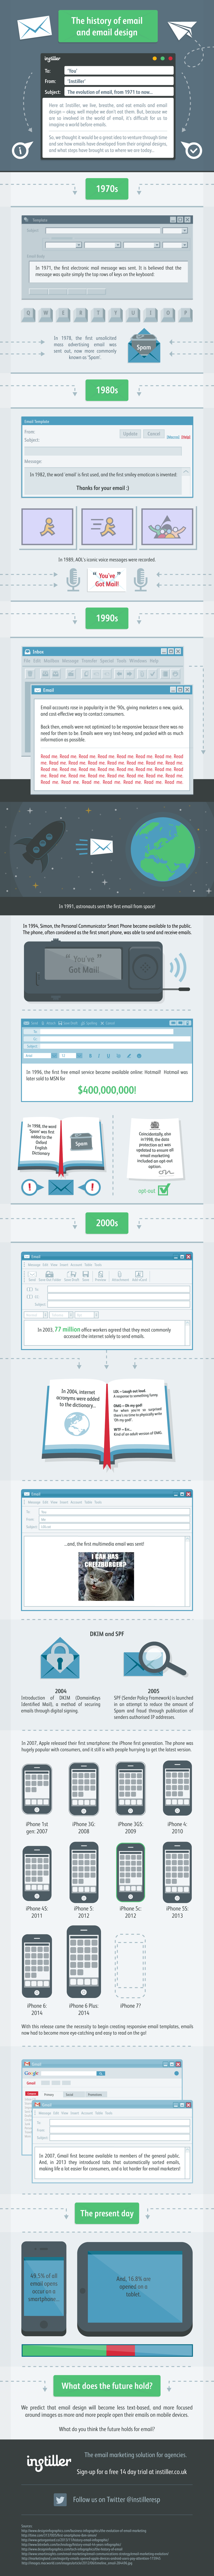 The history of email and email design